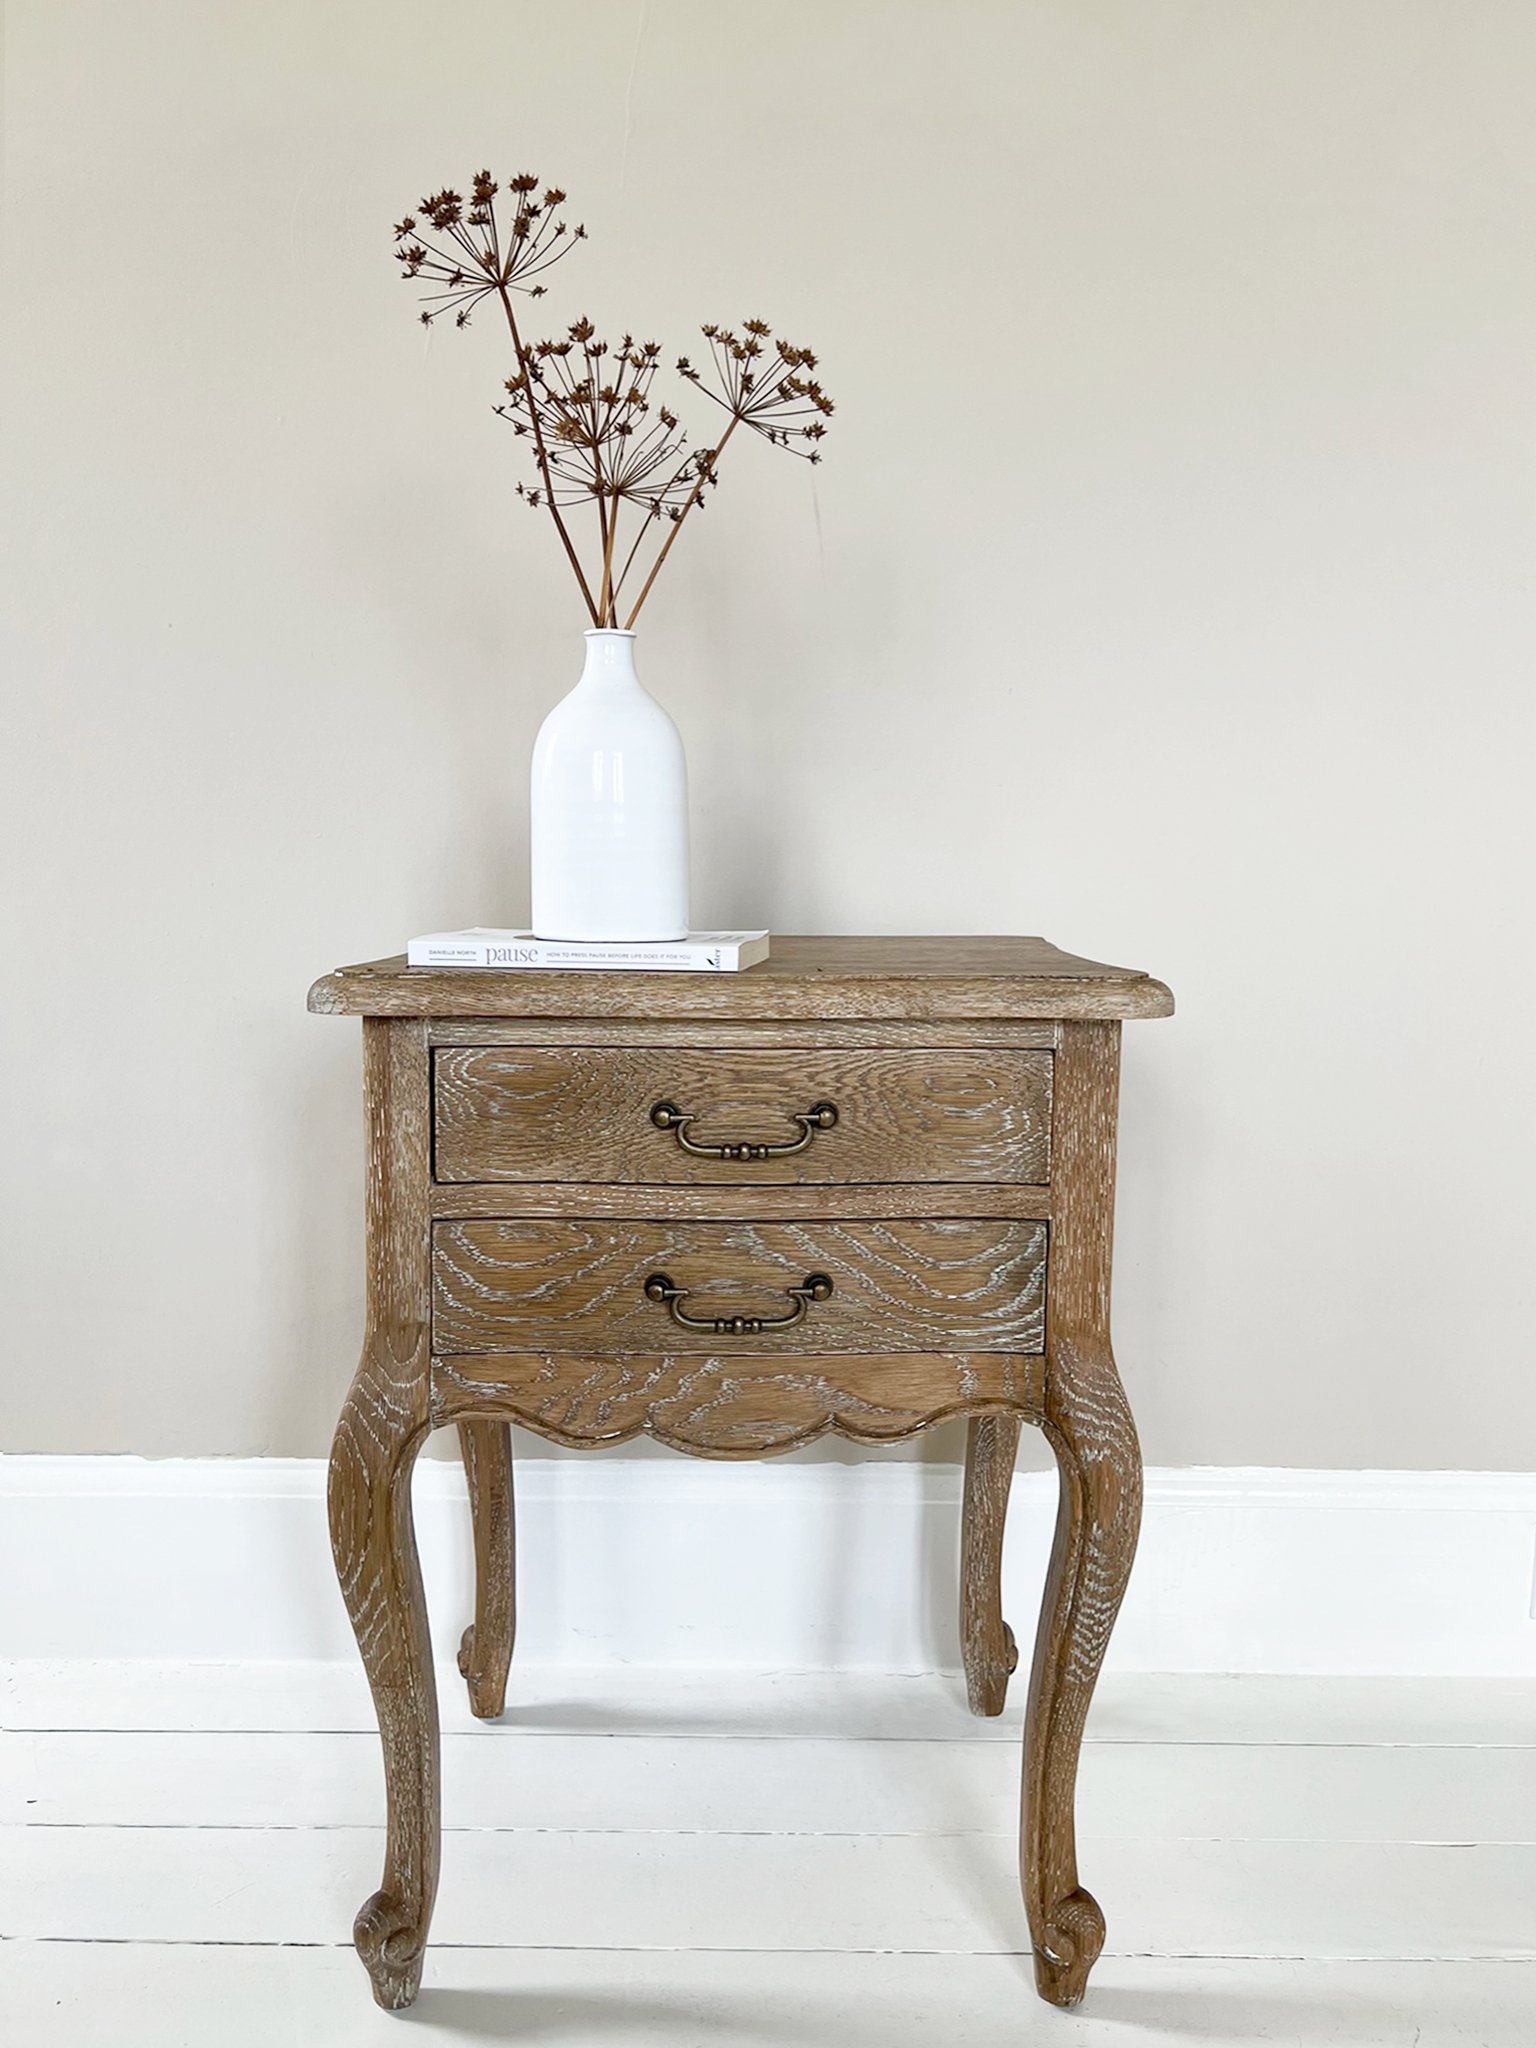 14 FRENCH BEDROOM French Romance Bedside Table - Lifestyle €433.05, 